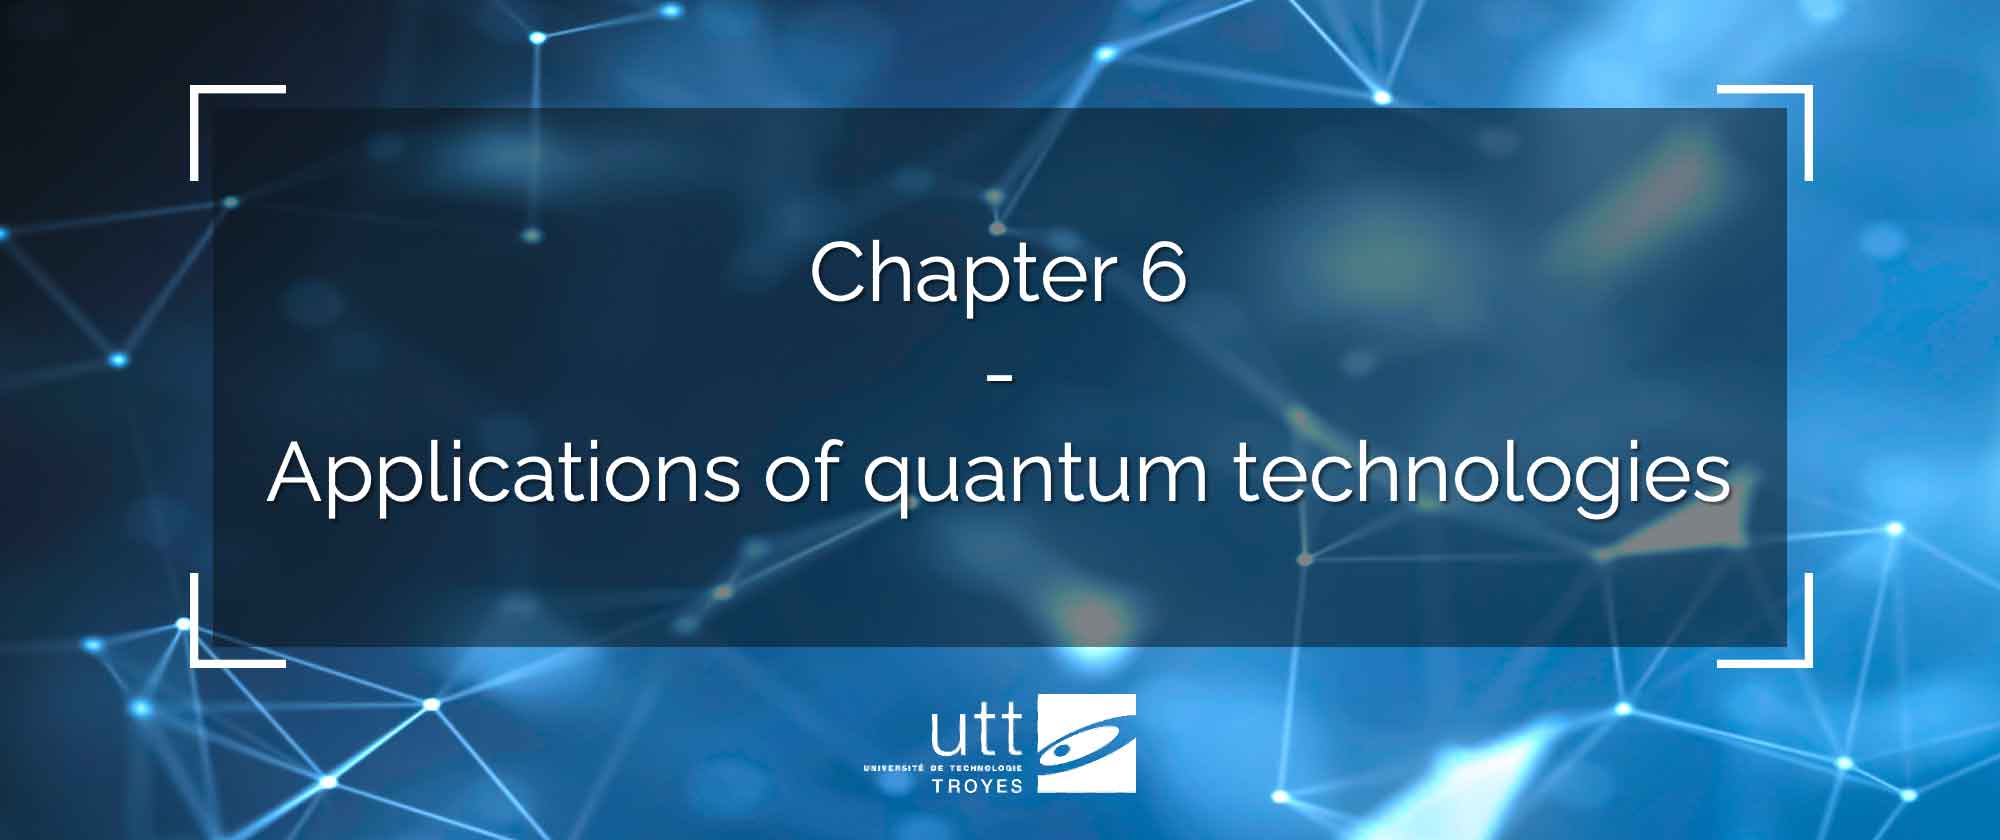 Chapter 6 - Applications of quantum technologies